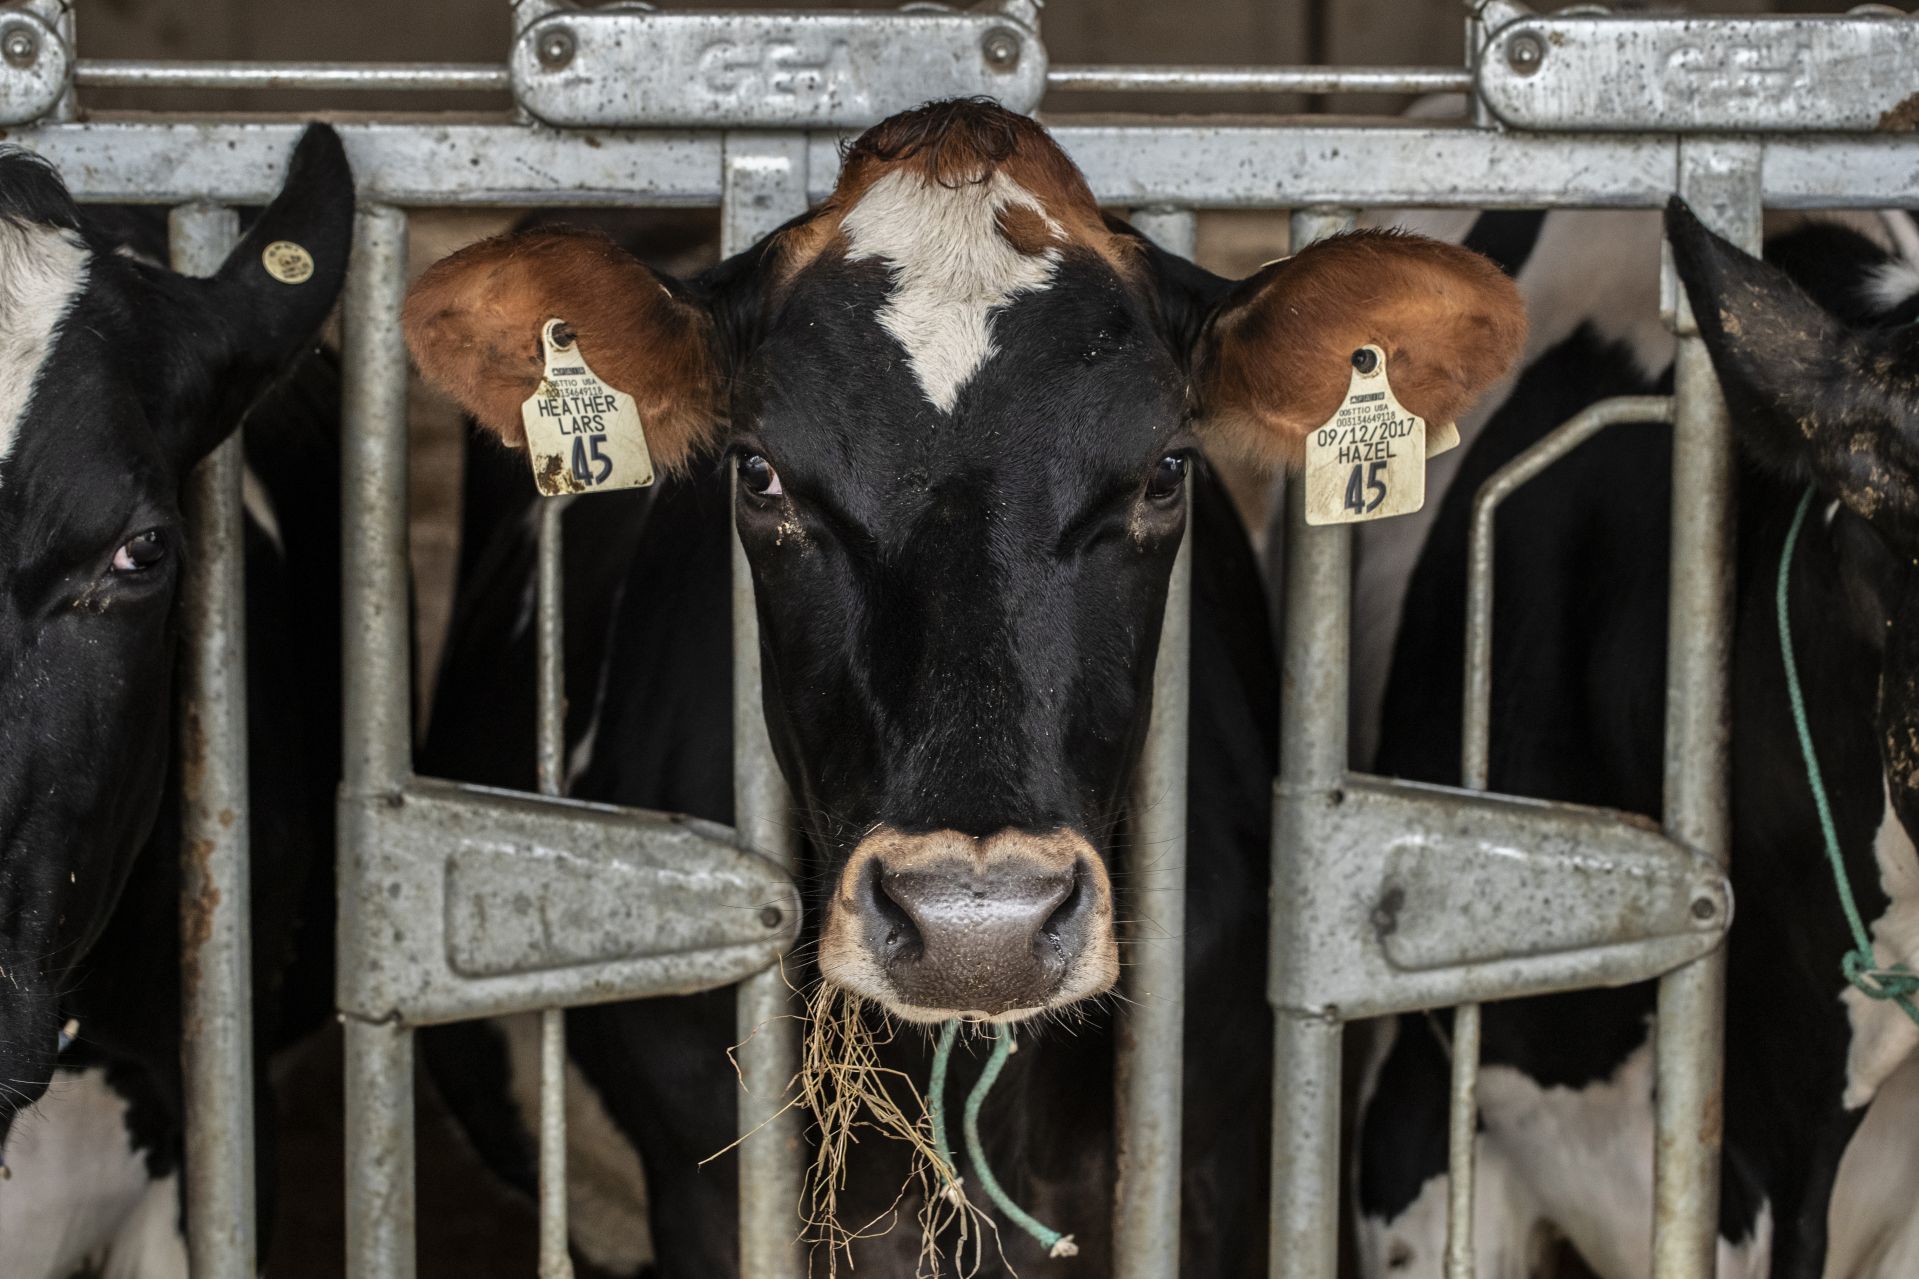 A cow’s ear tags include their name (Hazel, at right) and their sire and dam’s names (left, Heather and Lars). The tags also display their unique Animal Identification Number. (Phyllis Graber Jensen/Bates College)